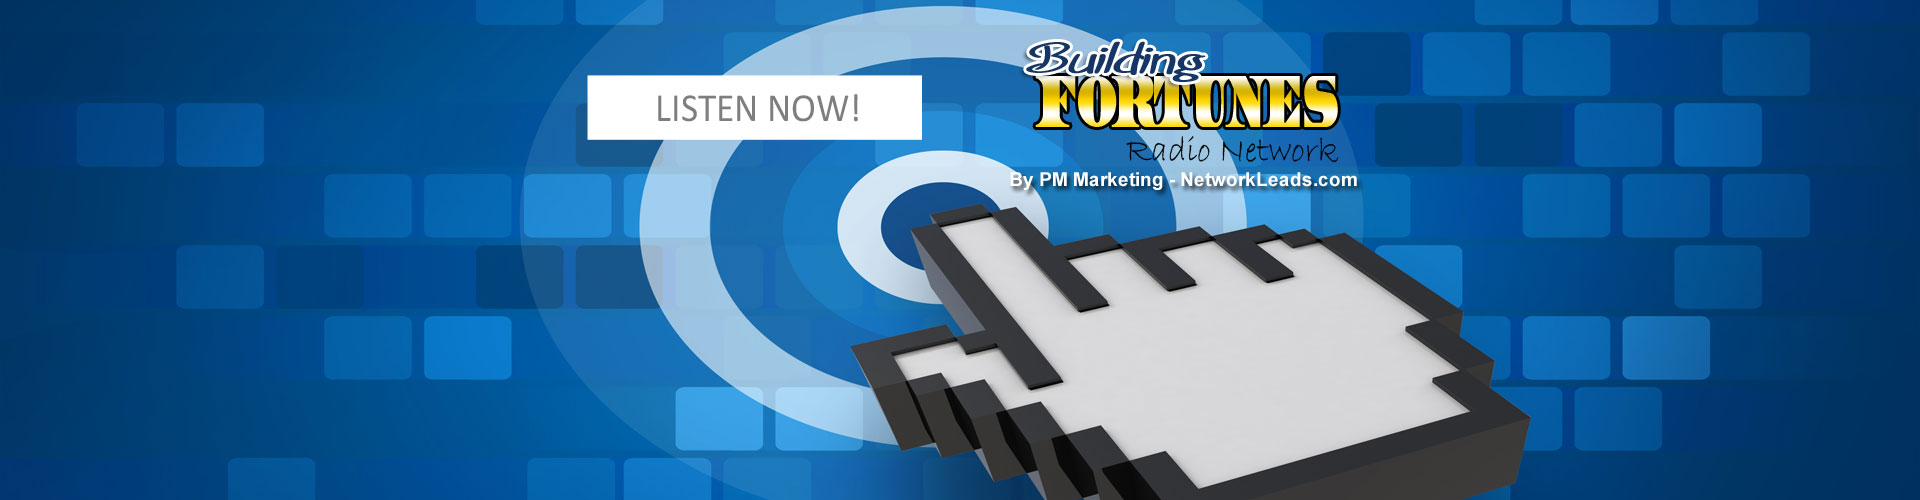 Building Fortunes Radio Network Join Us Live